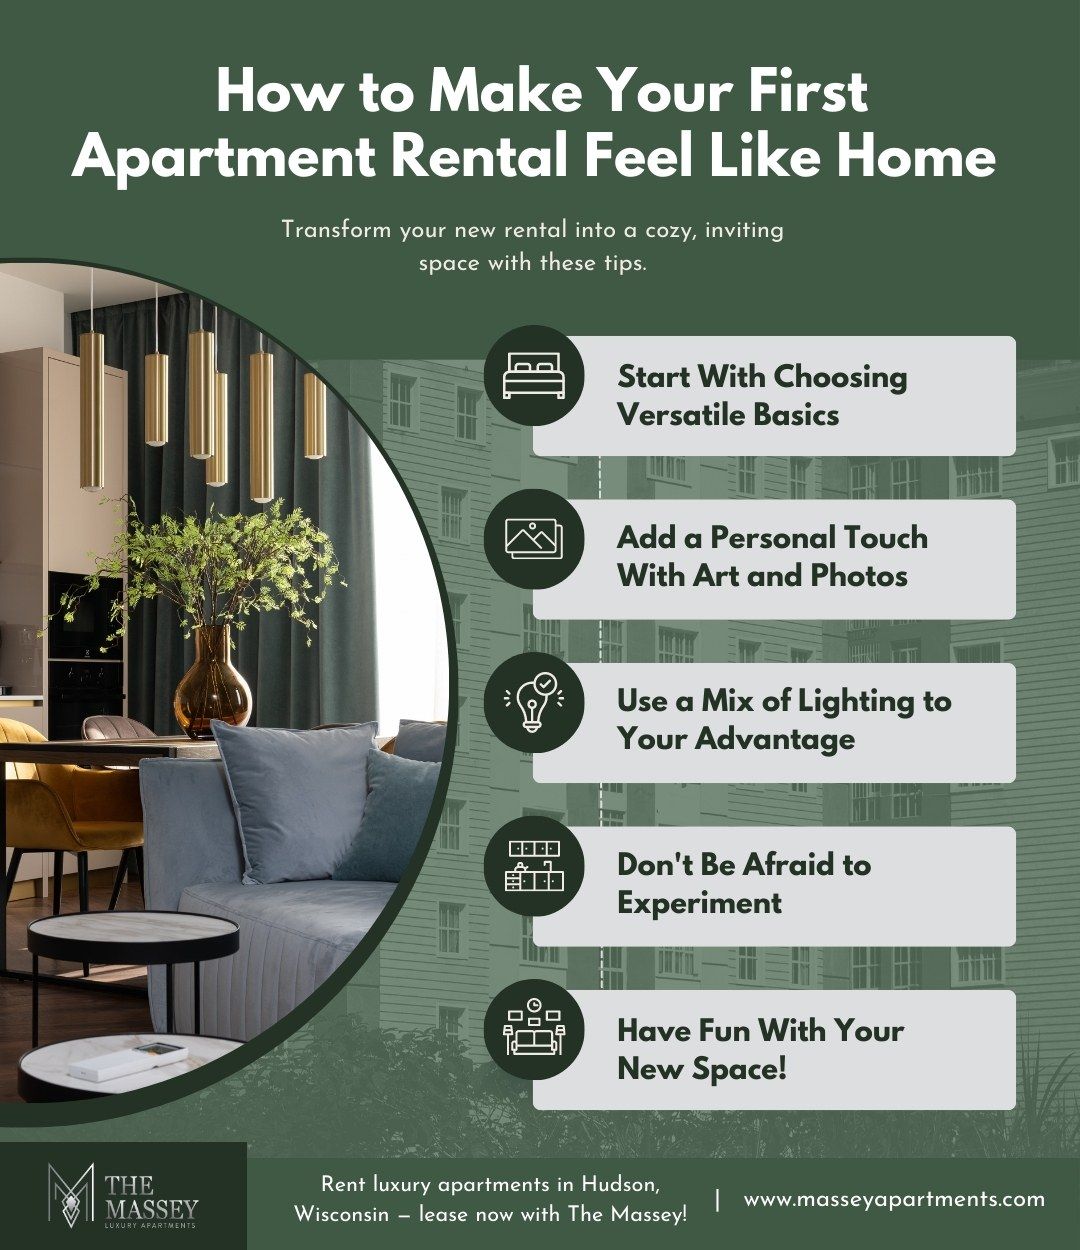 How to Make Your First Apartment Rental Feel Like Home - Infographic.jpg